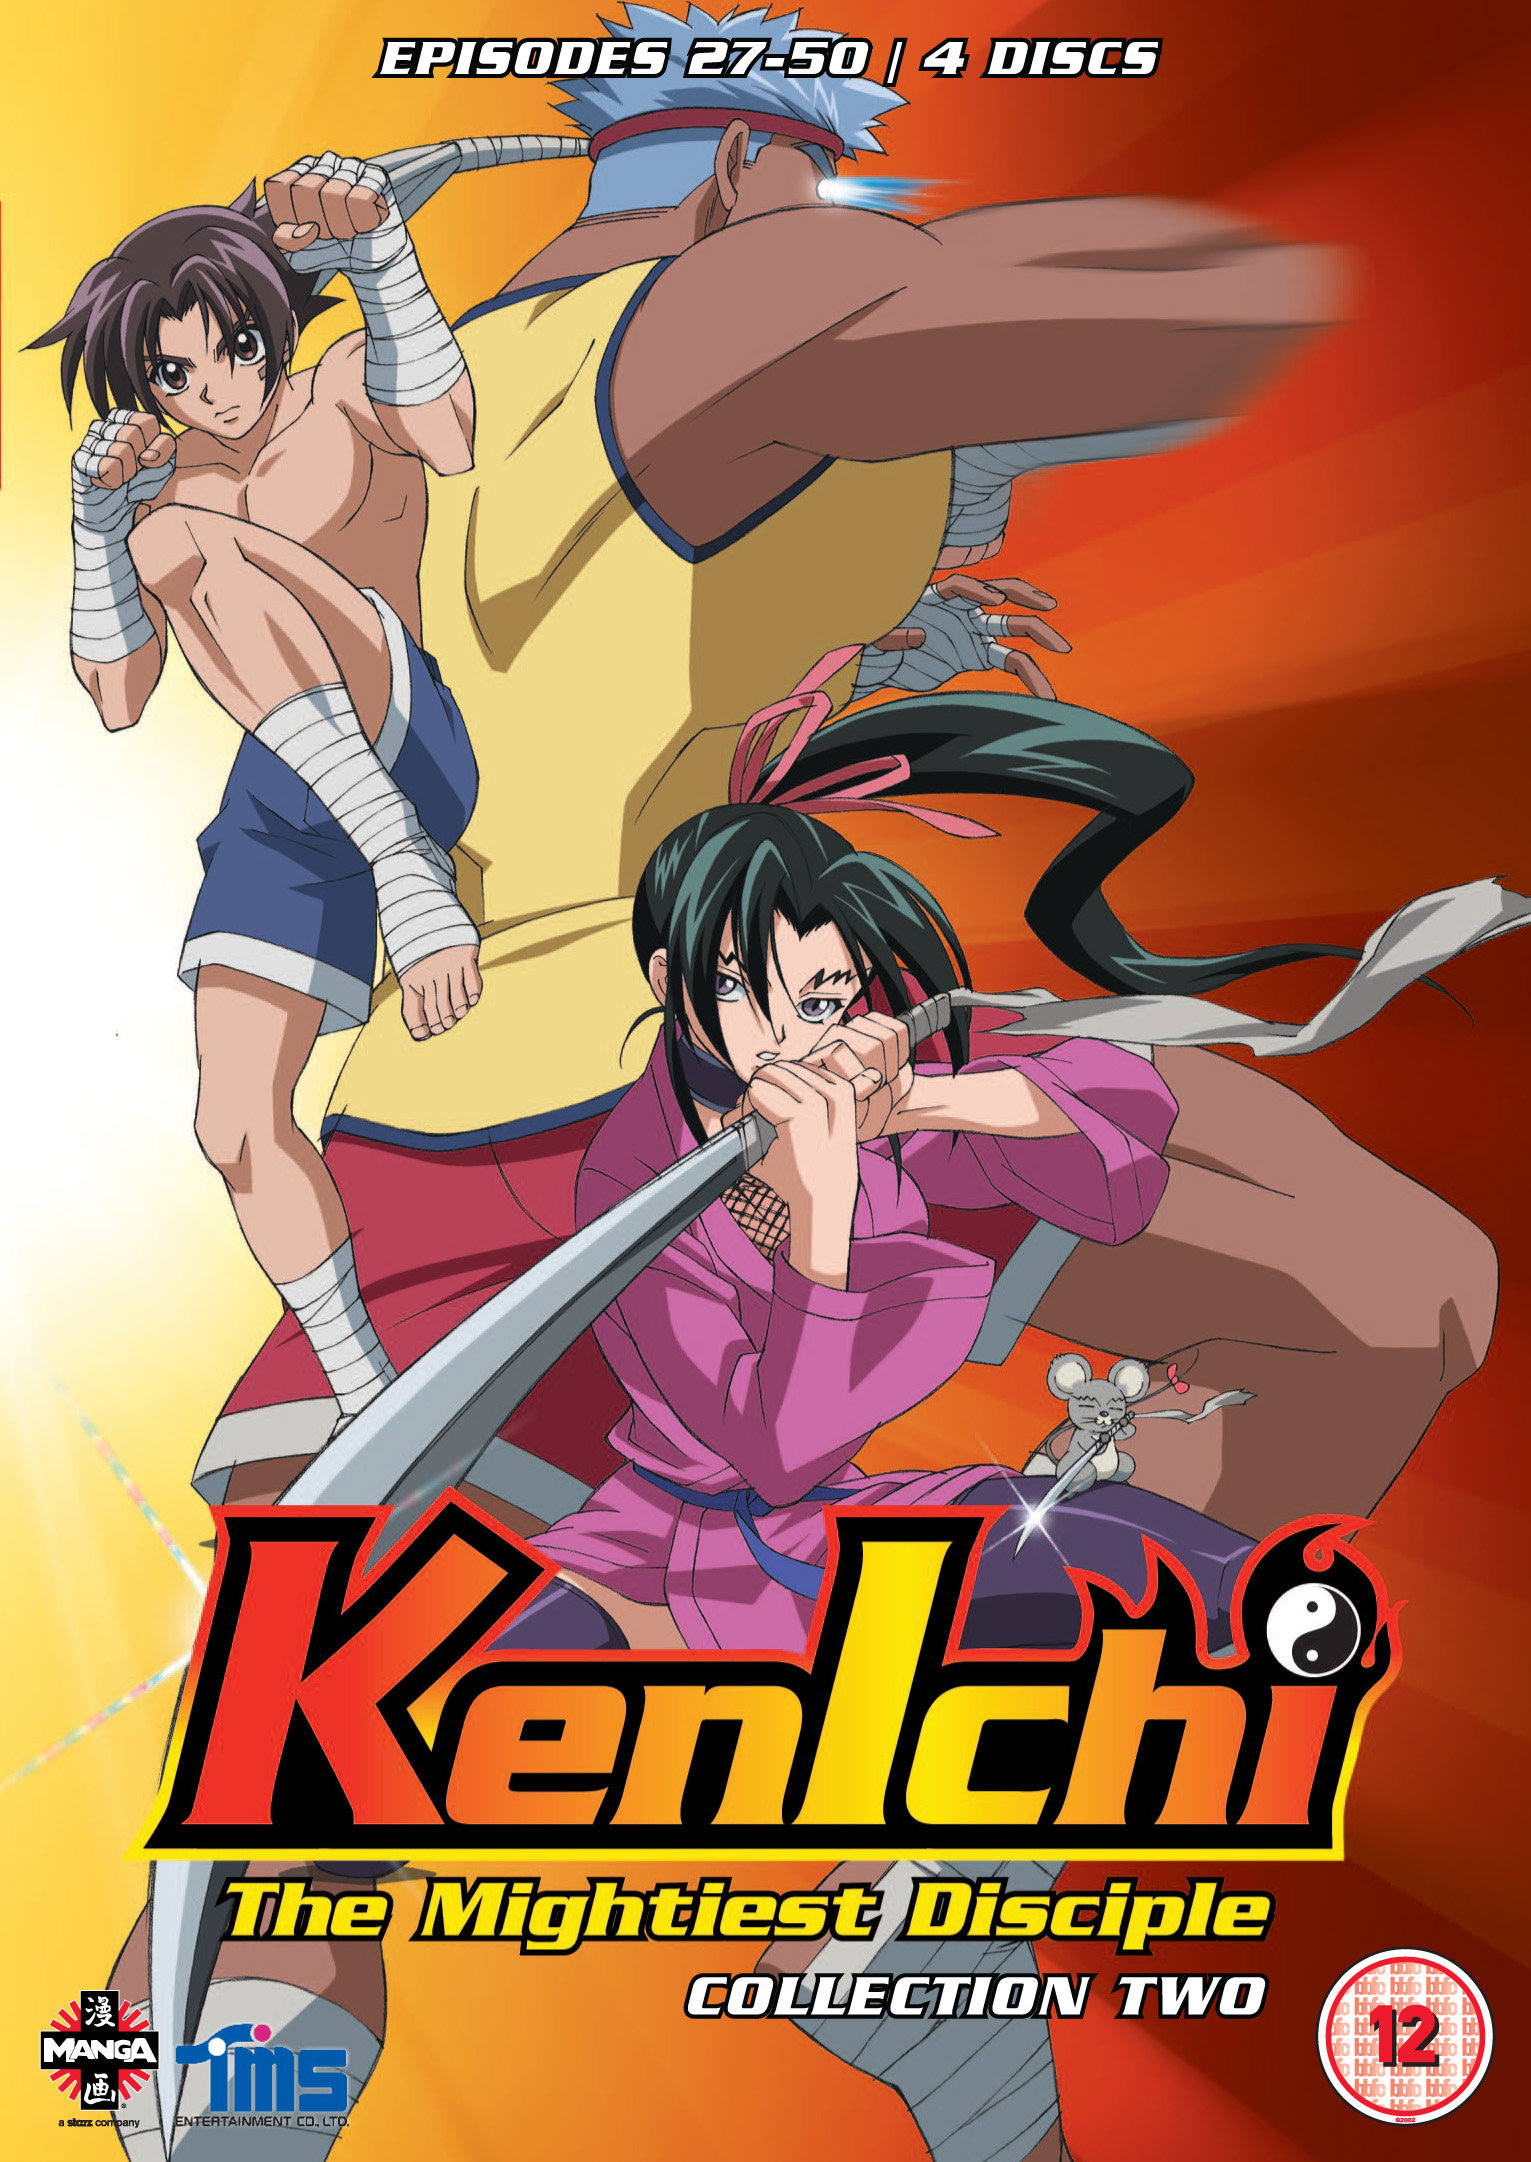 About the DVD - Kenichi: The Mightiest Disciple Part 2.